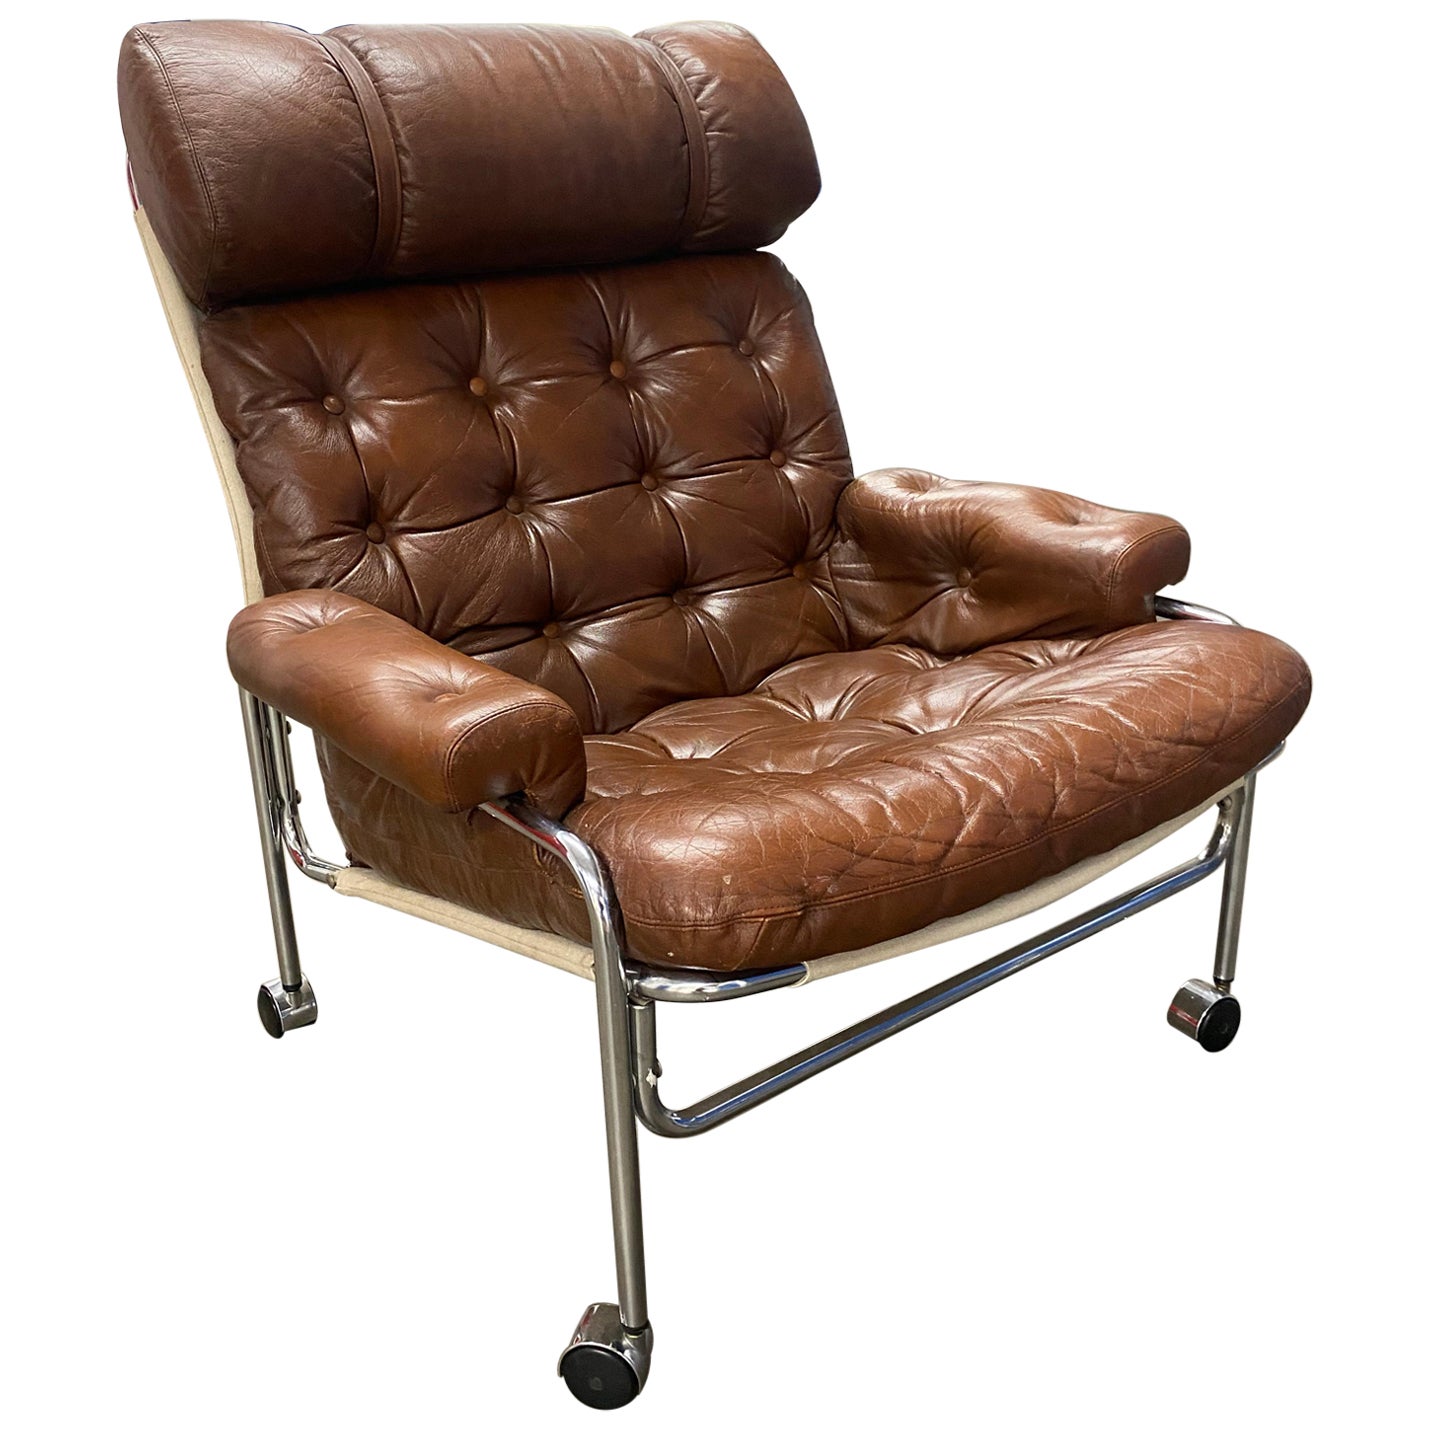 1960s Lindlöfs Lounge Chair in Chrome and Leather with footstool